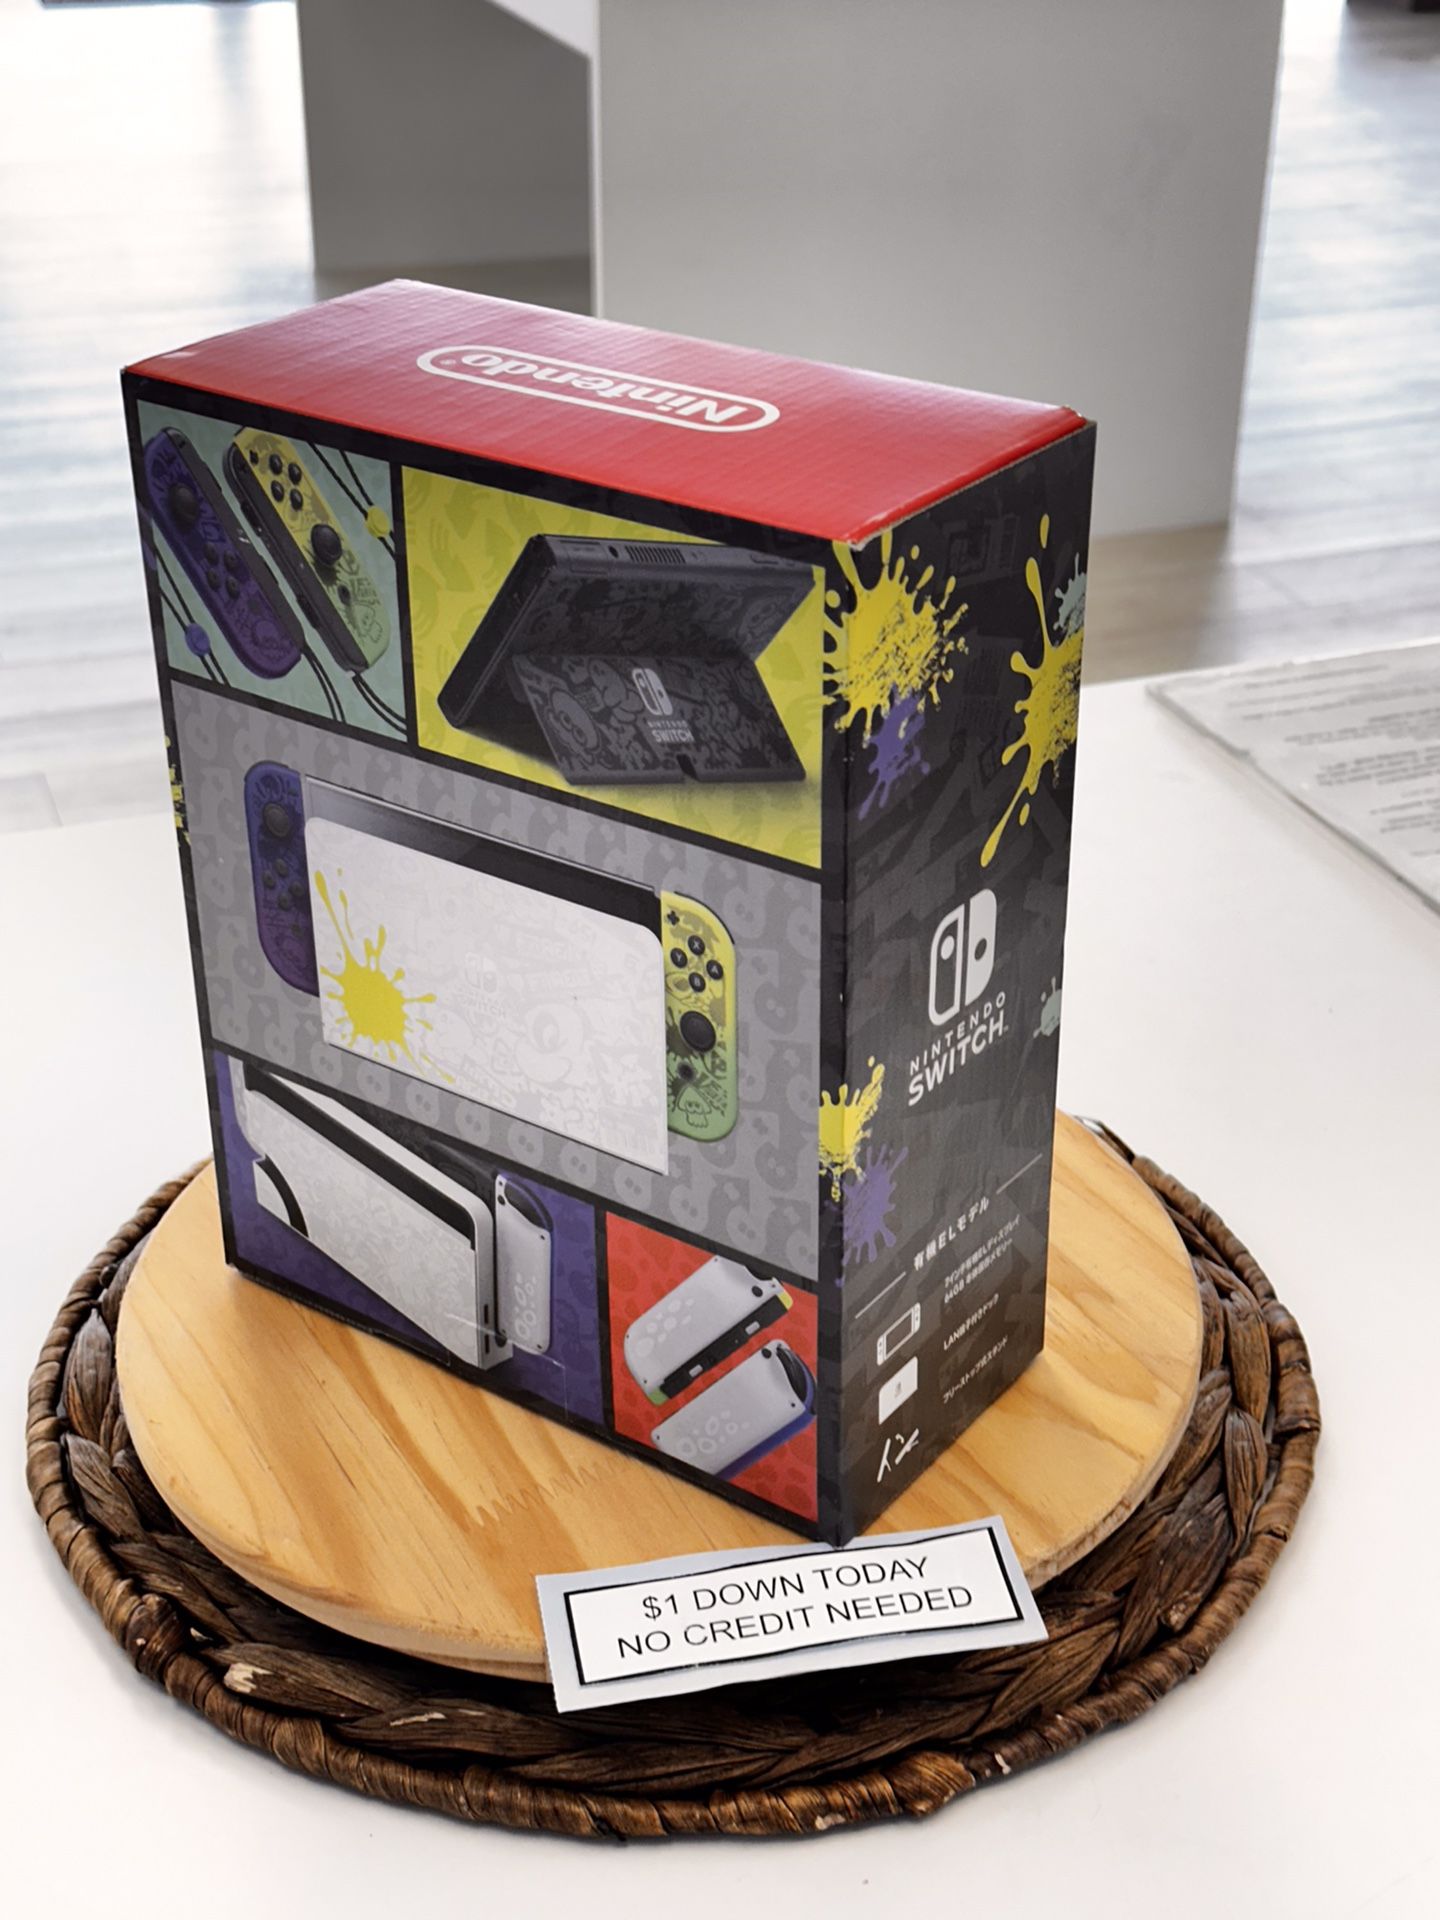 Nintendo Switch OLED Model Splatoon 3 Special Edition Gaming Console - Pay $1 Today to Take it Home and Pay the Rest Later!